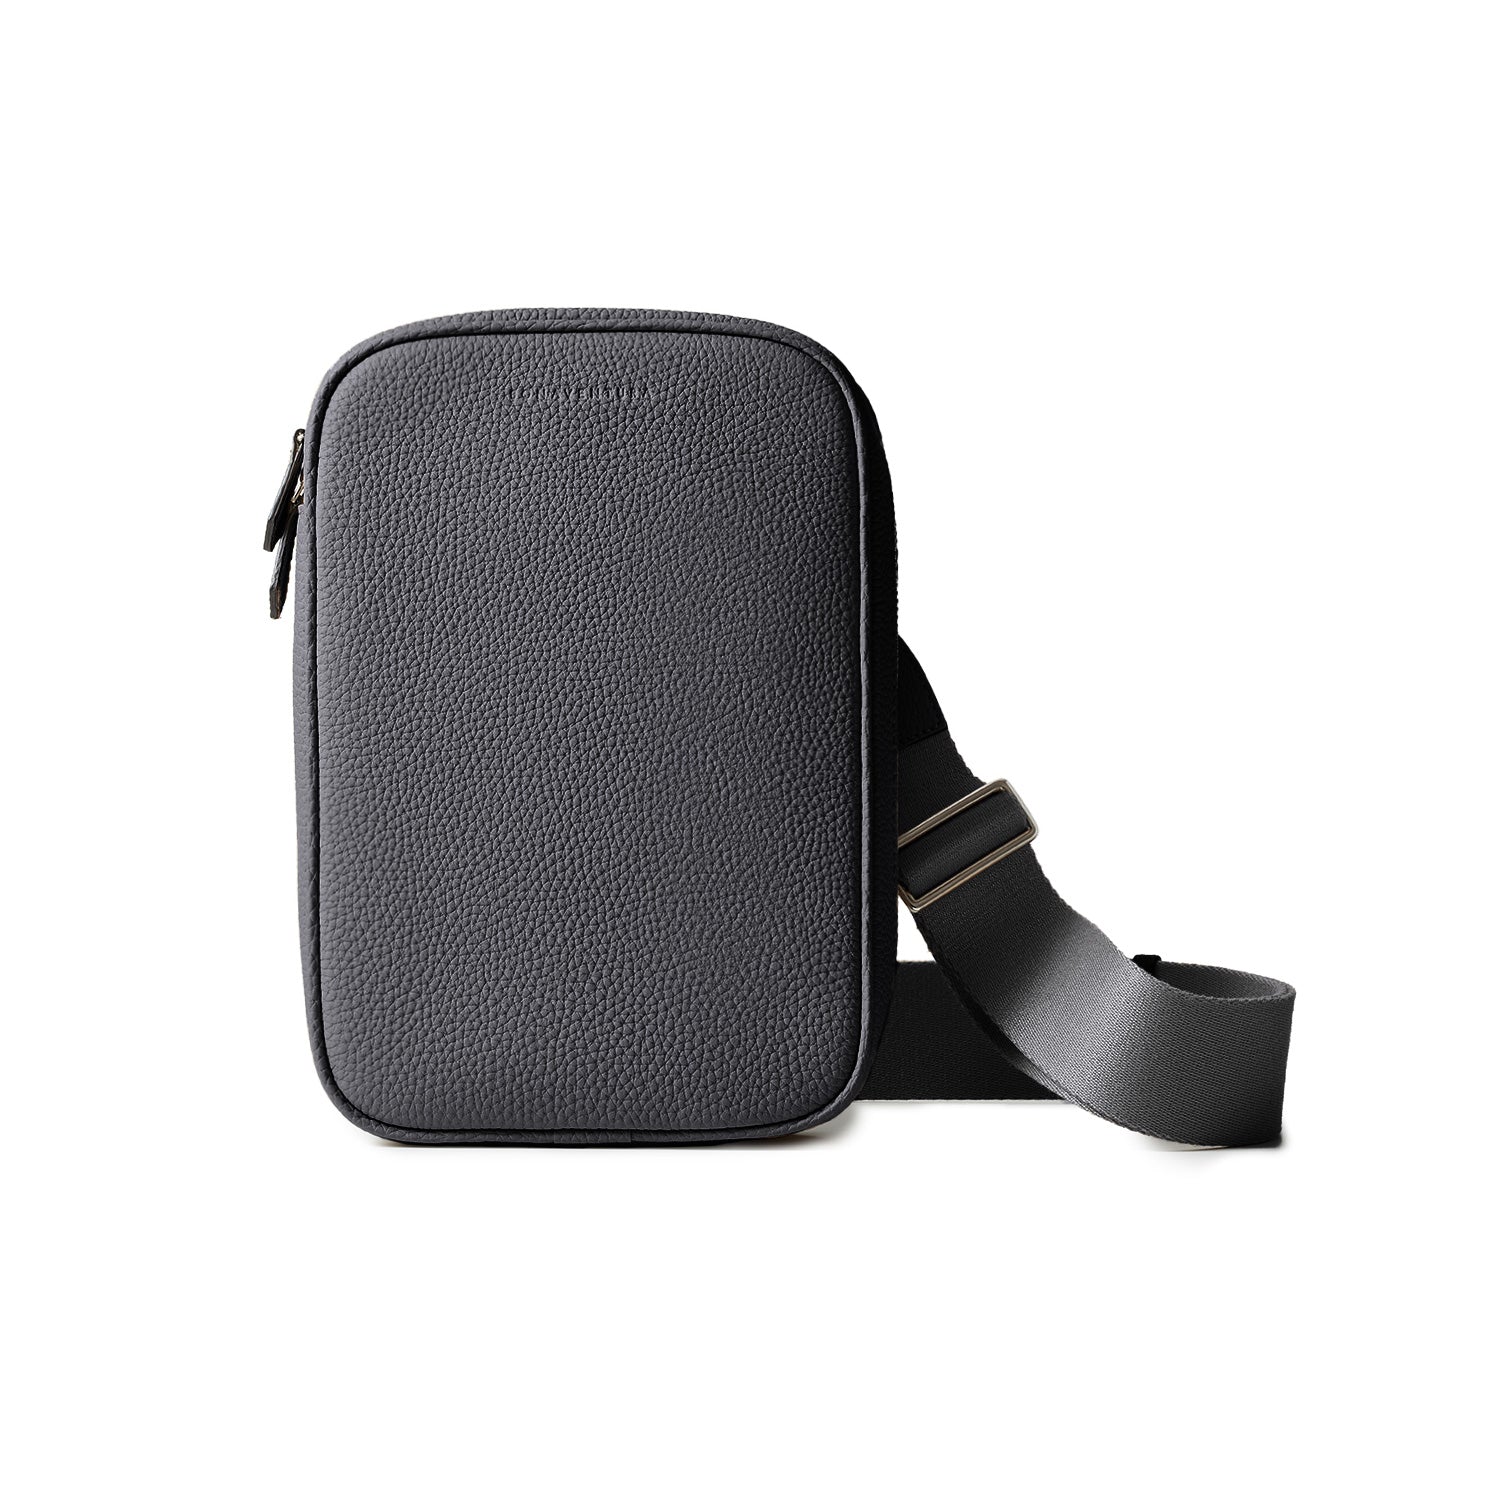 Paolo crossbody bag in shrunk leather and charcoal grey